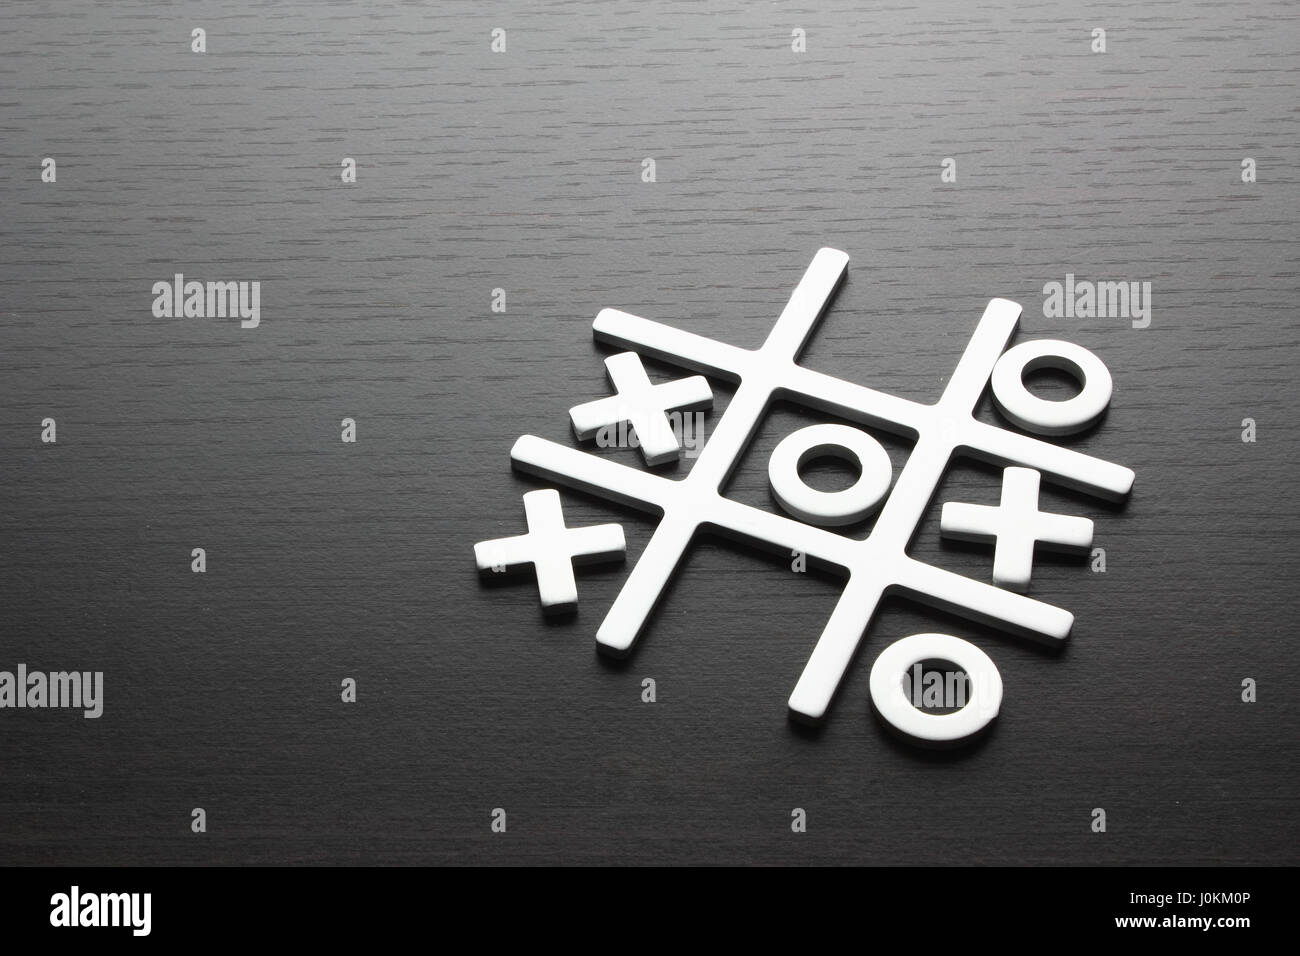 Tic Tac Toe Game on Wooden Background Stock Photo